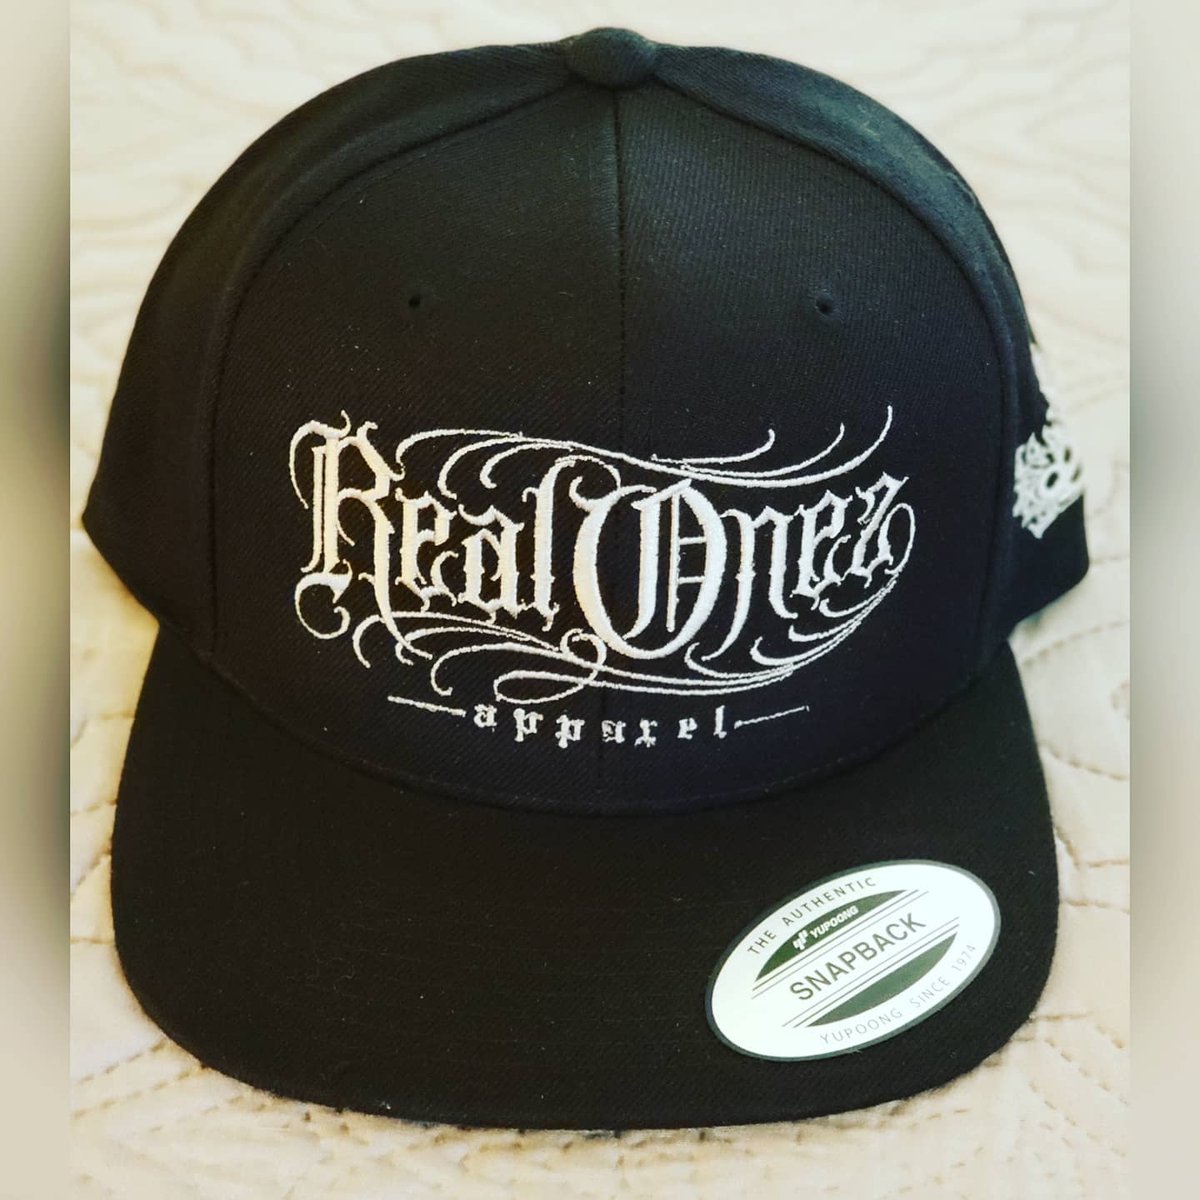 Products | Real Onez Apparel